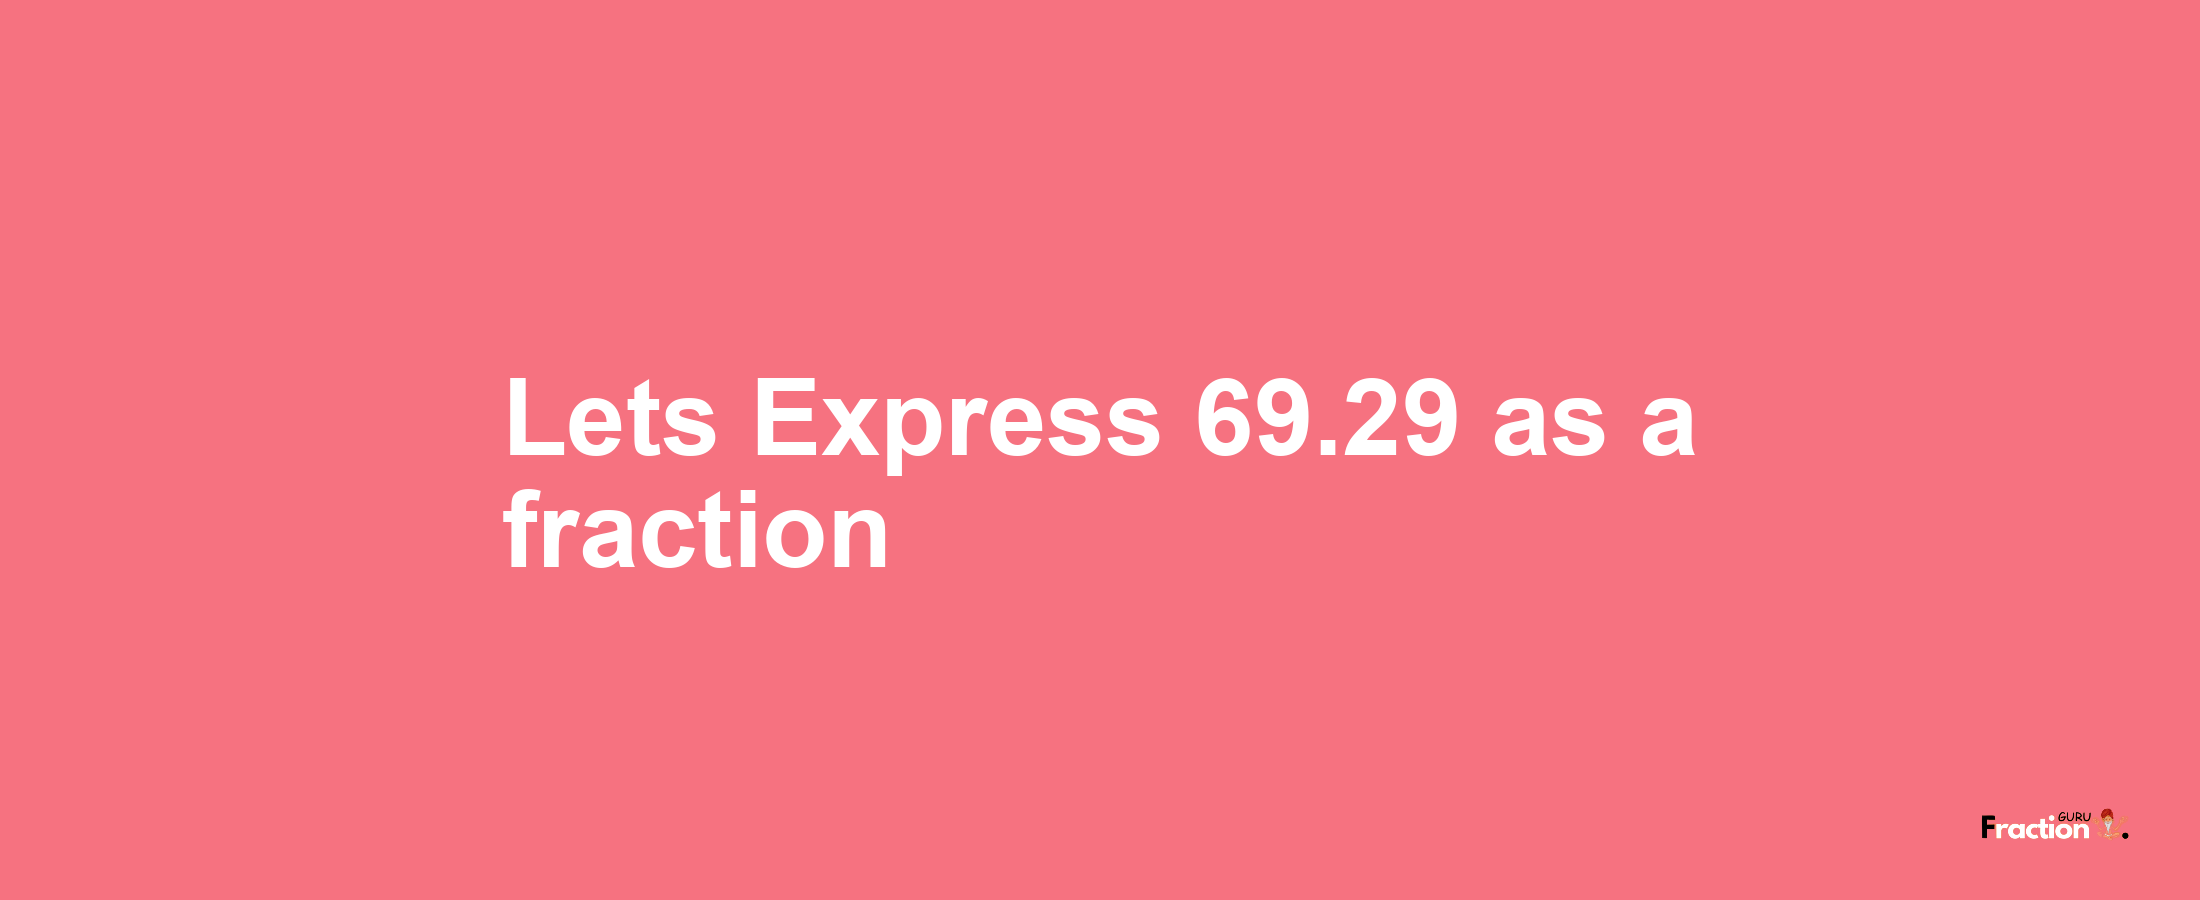 Lets Express 69.29 as afraction